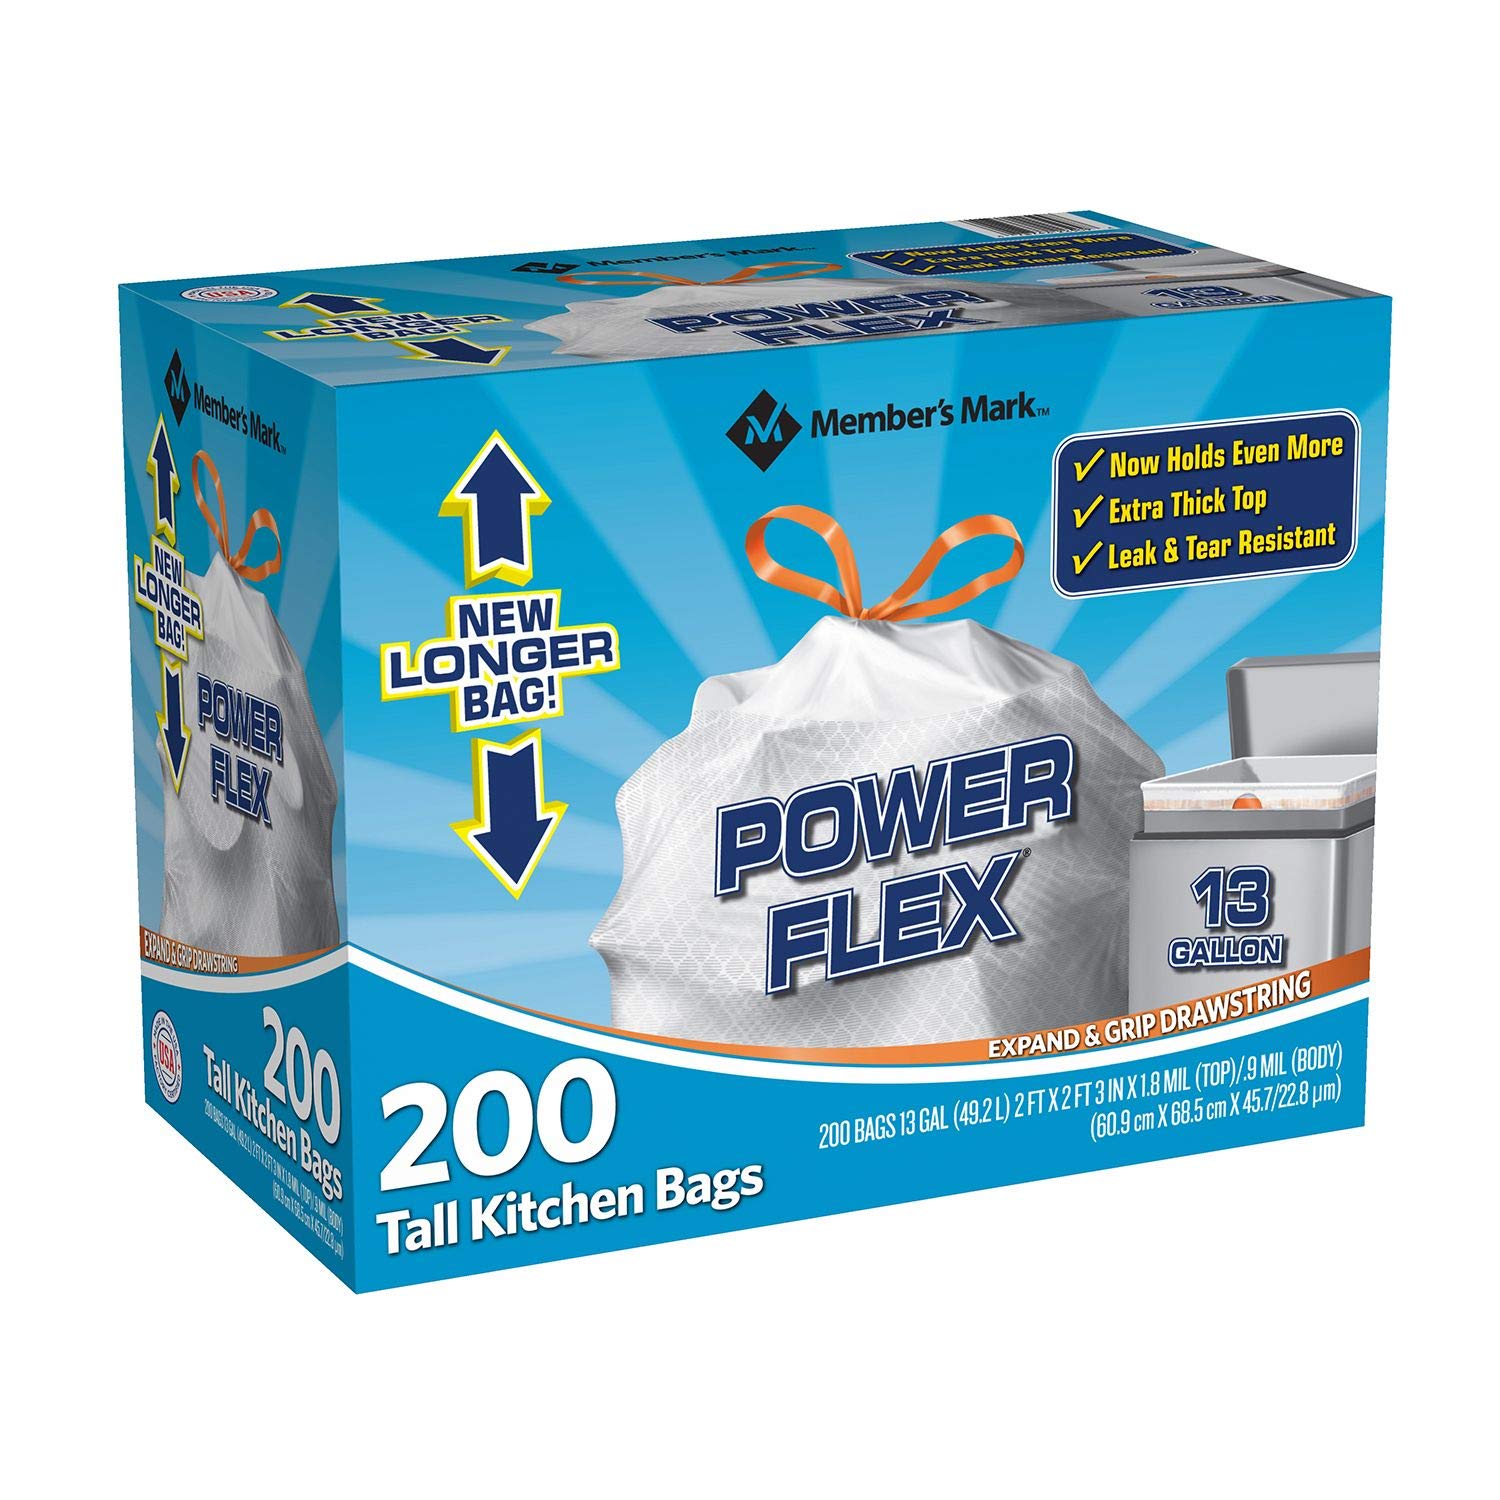 200-Count 13-Gallon Member's Mark Power Flex Tall Kitchen Drawstring Bags $17.98 + Free Shipping w/ Prime or on orders $25+